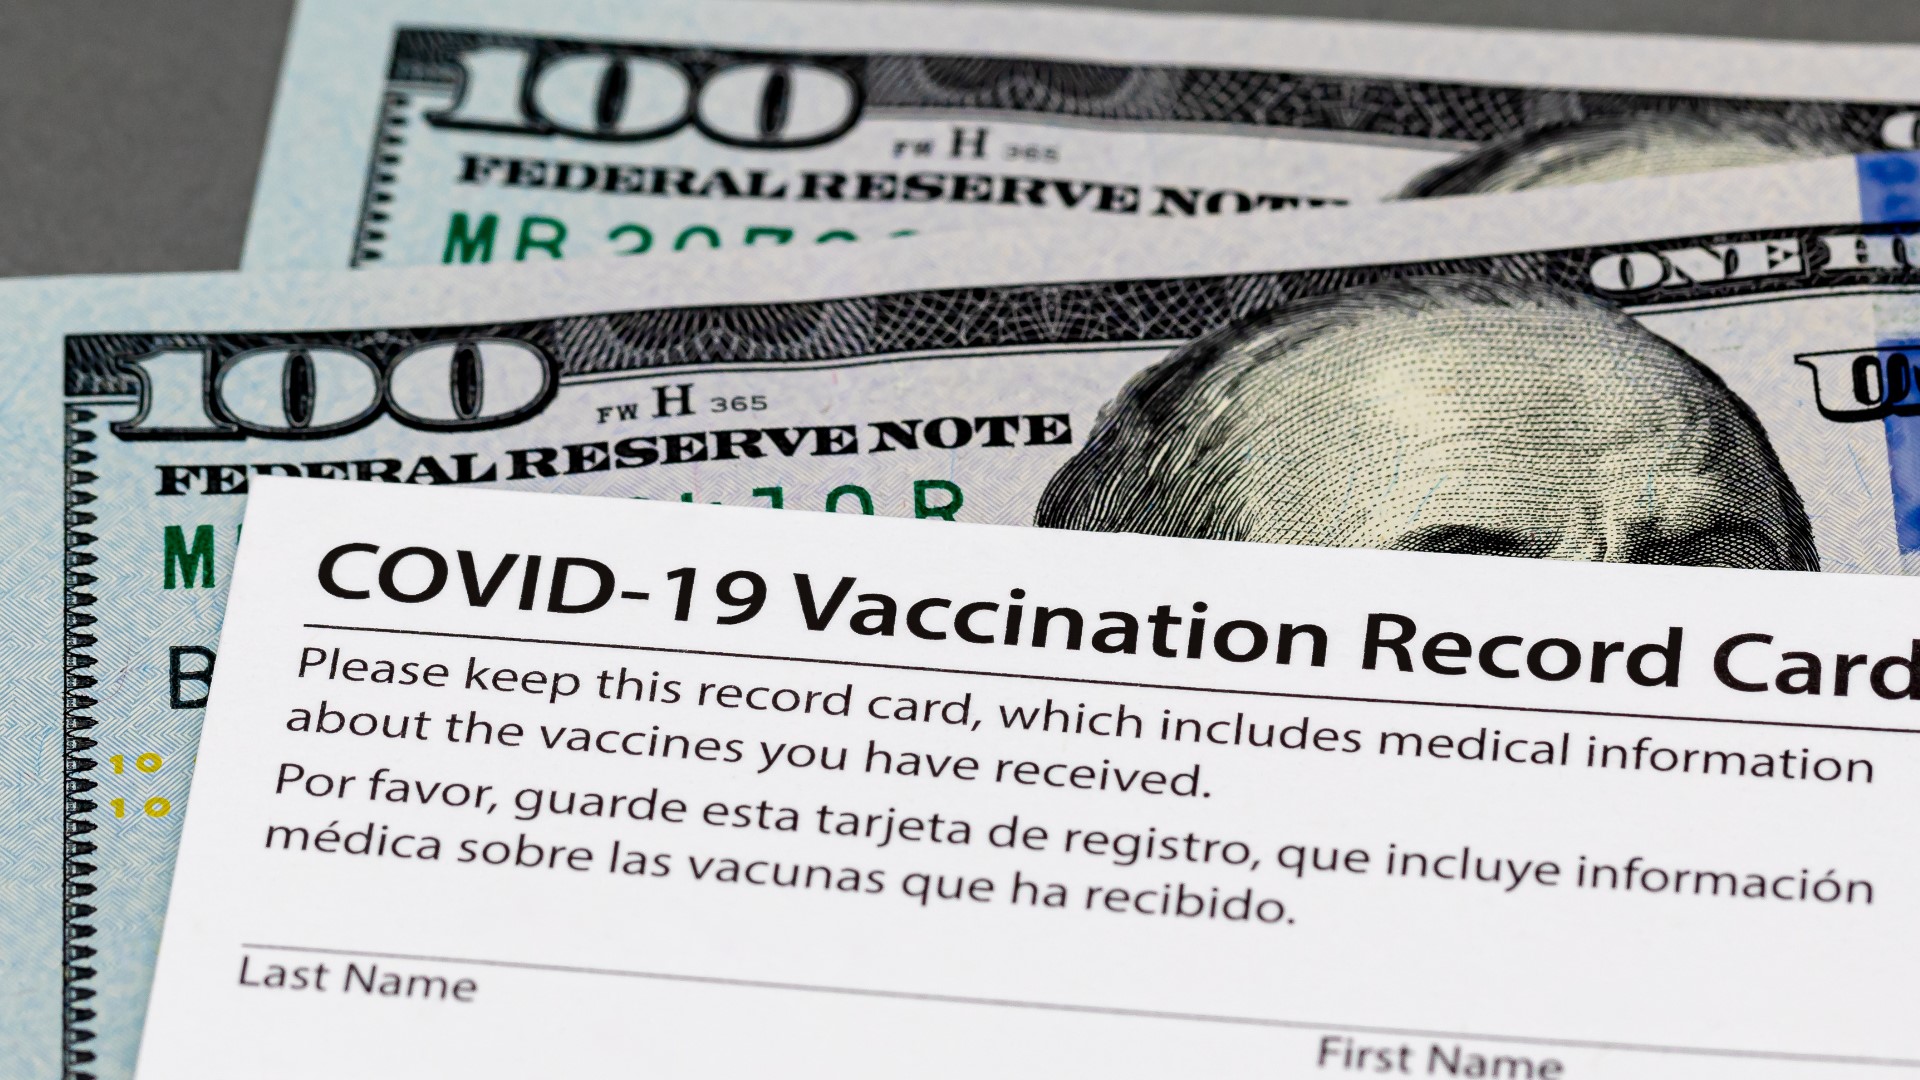 North Carolina health officials say the vaccine cash incentive program this summer was effective at boosting vaccinations.